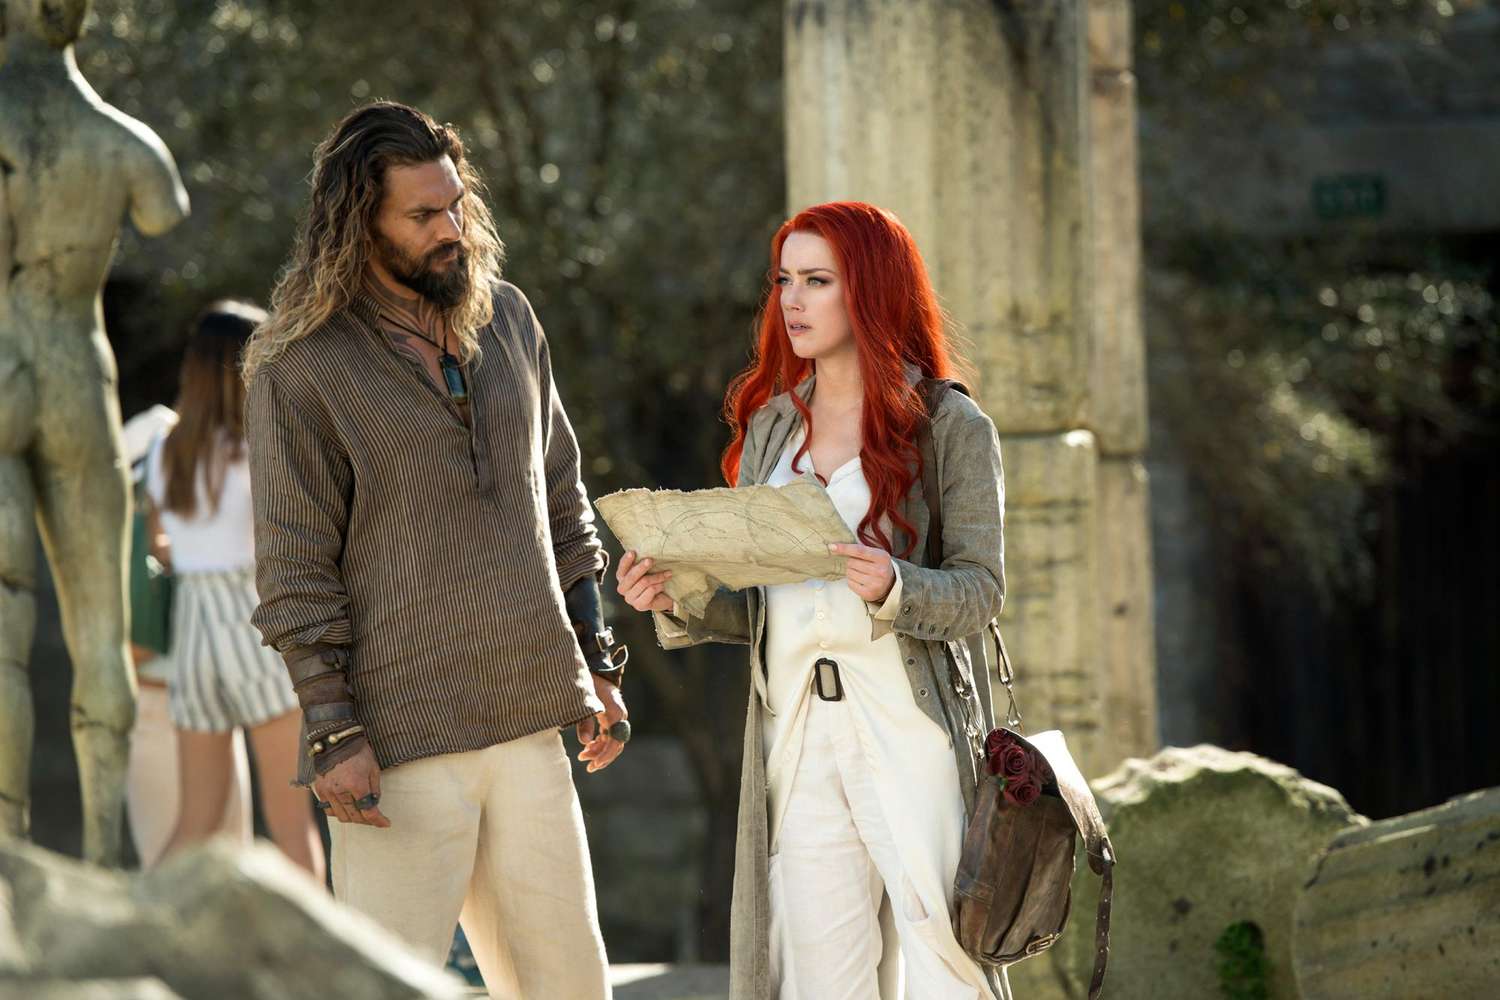 Johnny Depp says he helped Amber Heard get 'Aquaman' role — but later warned Warner Bros. about her